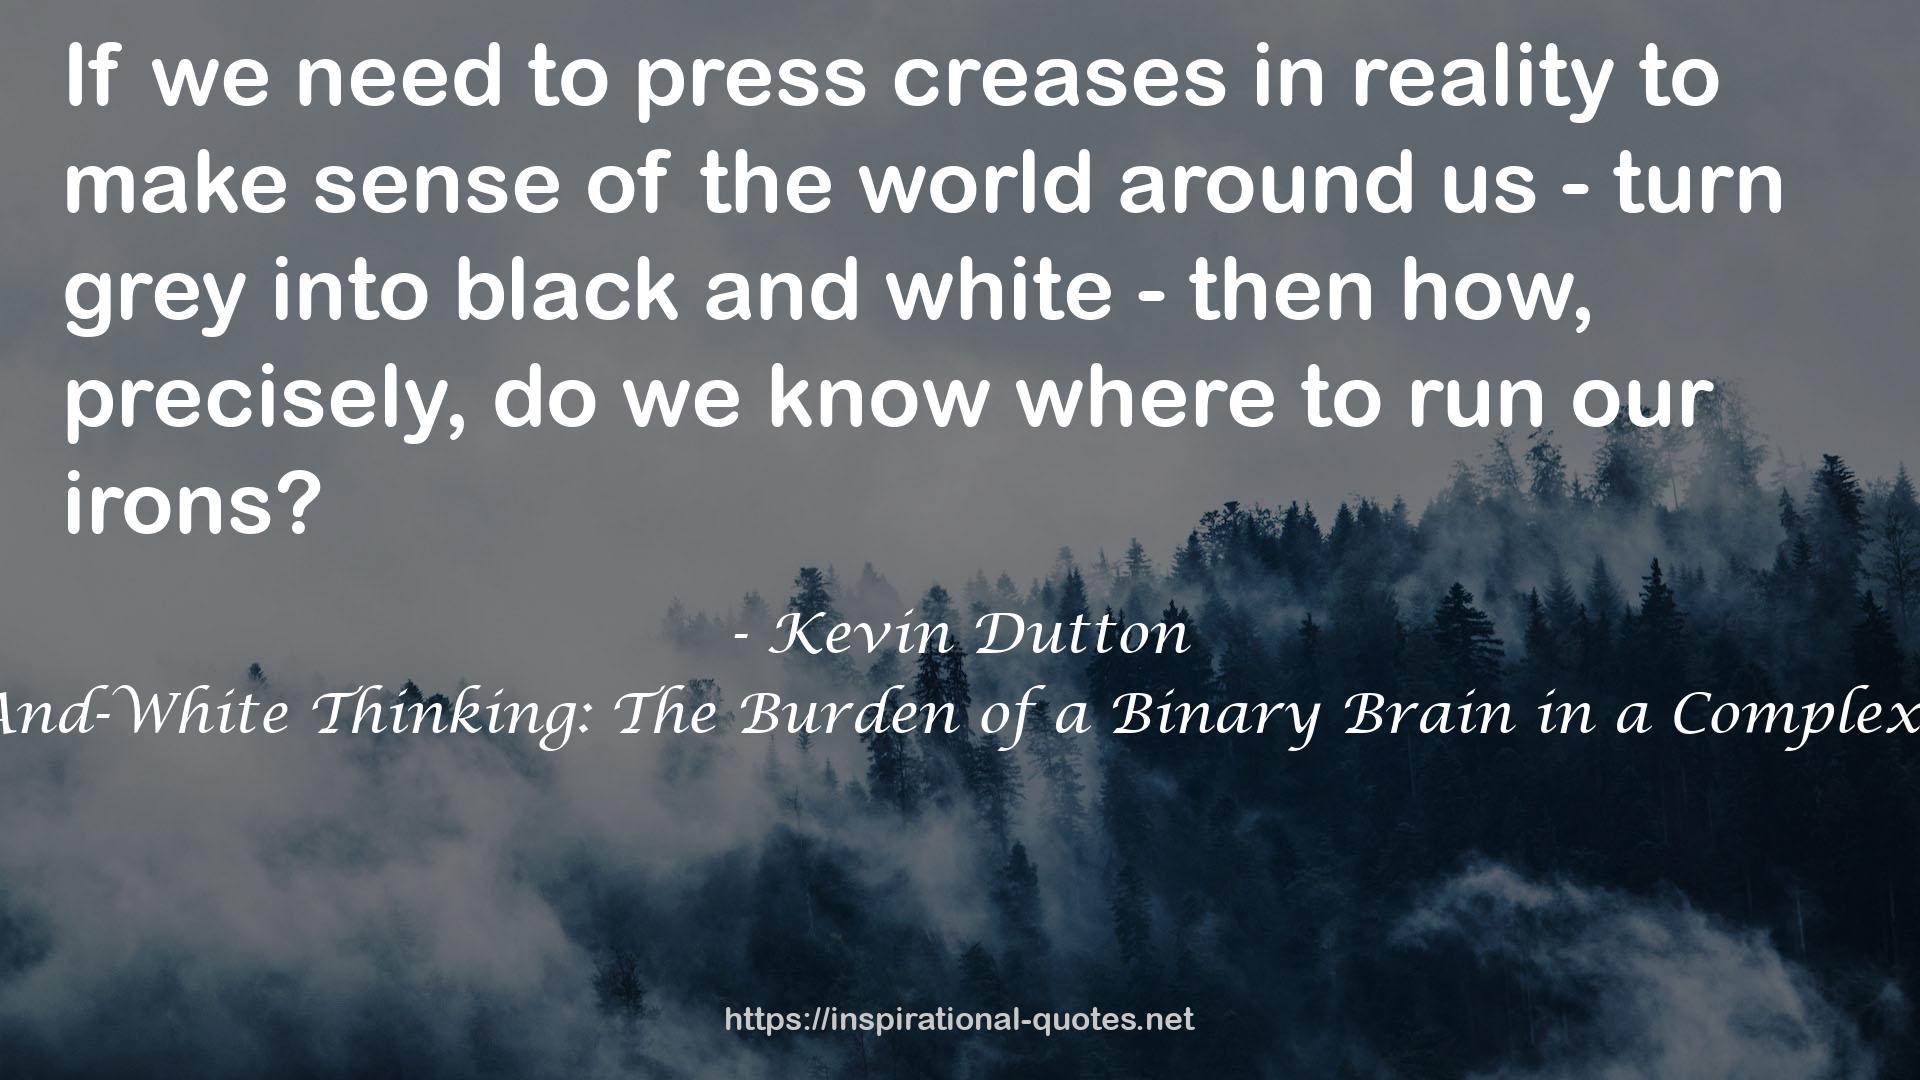 Black-And-White Thinking: The Burden of a Binary Brain in a Complex World QUOTES